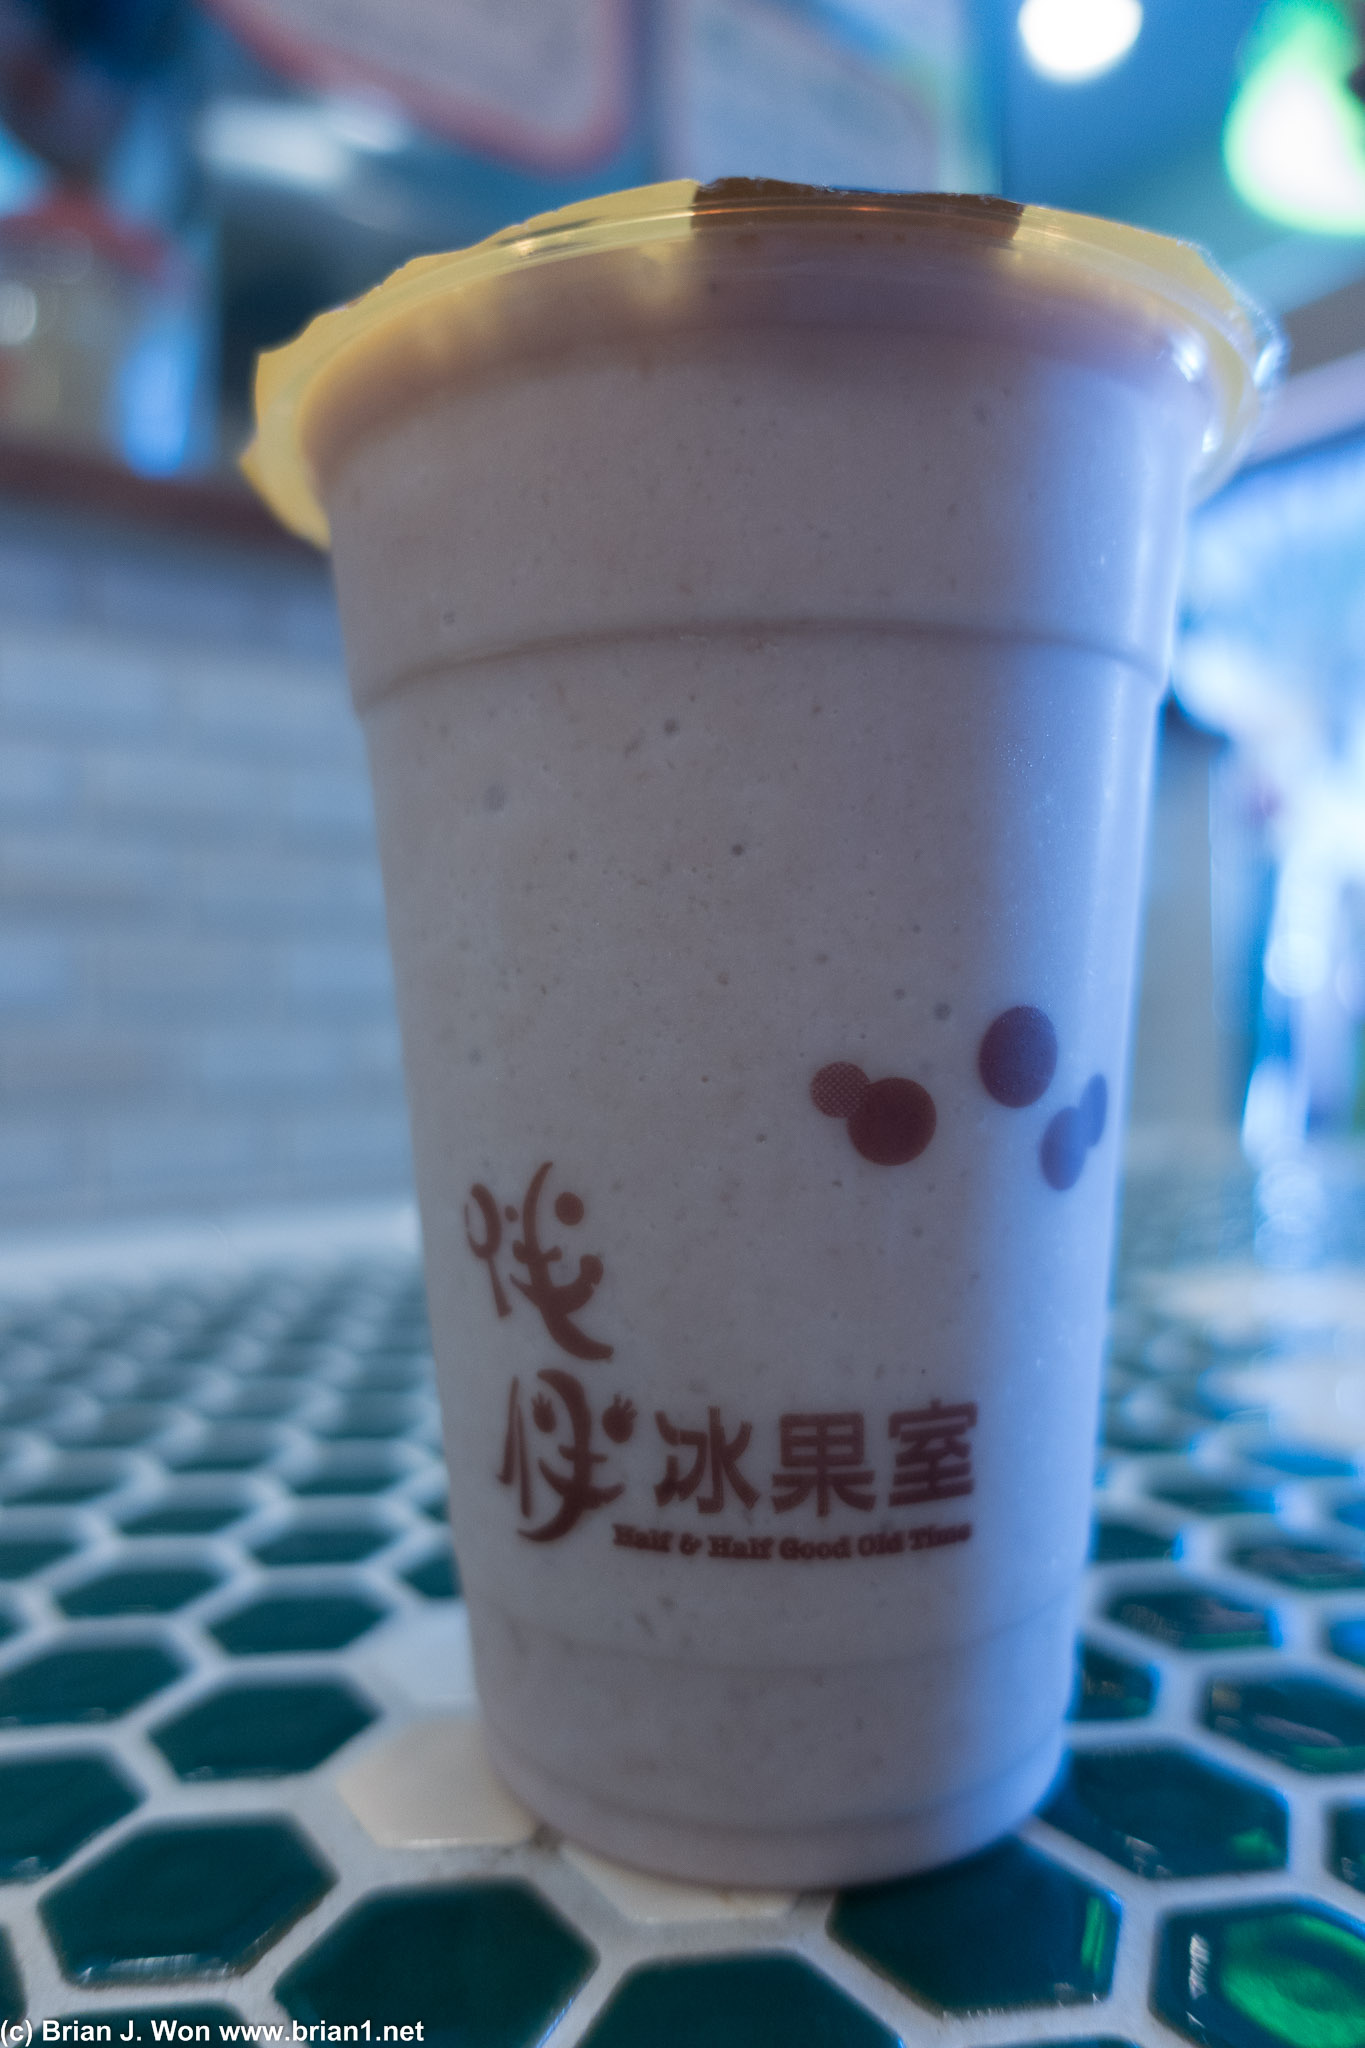 Taro smoothie. Just ok. Prefer taro milk tea, but they don't offer it here.